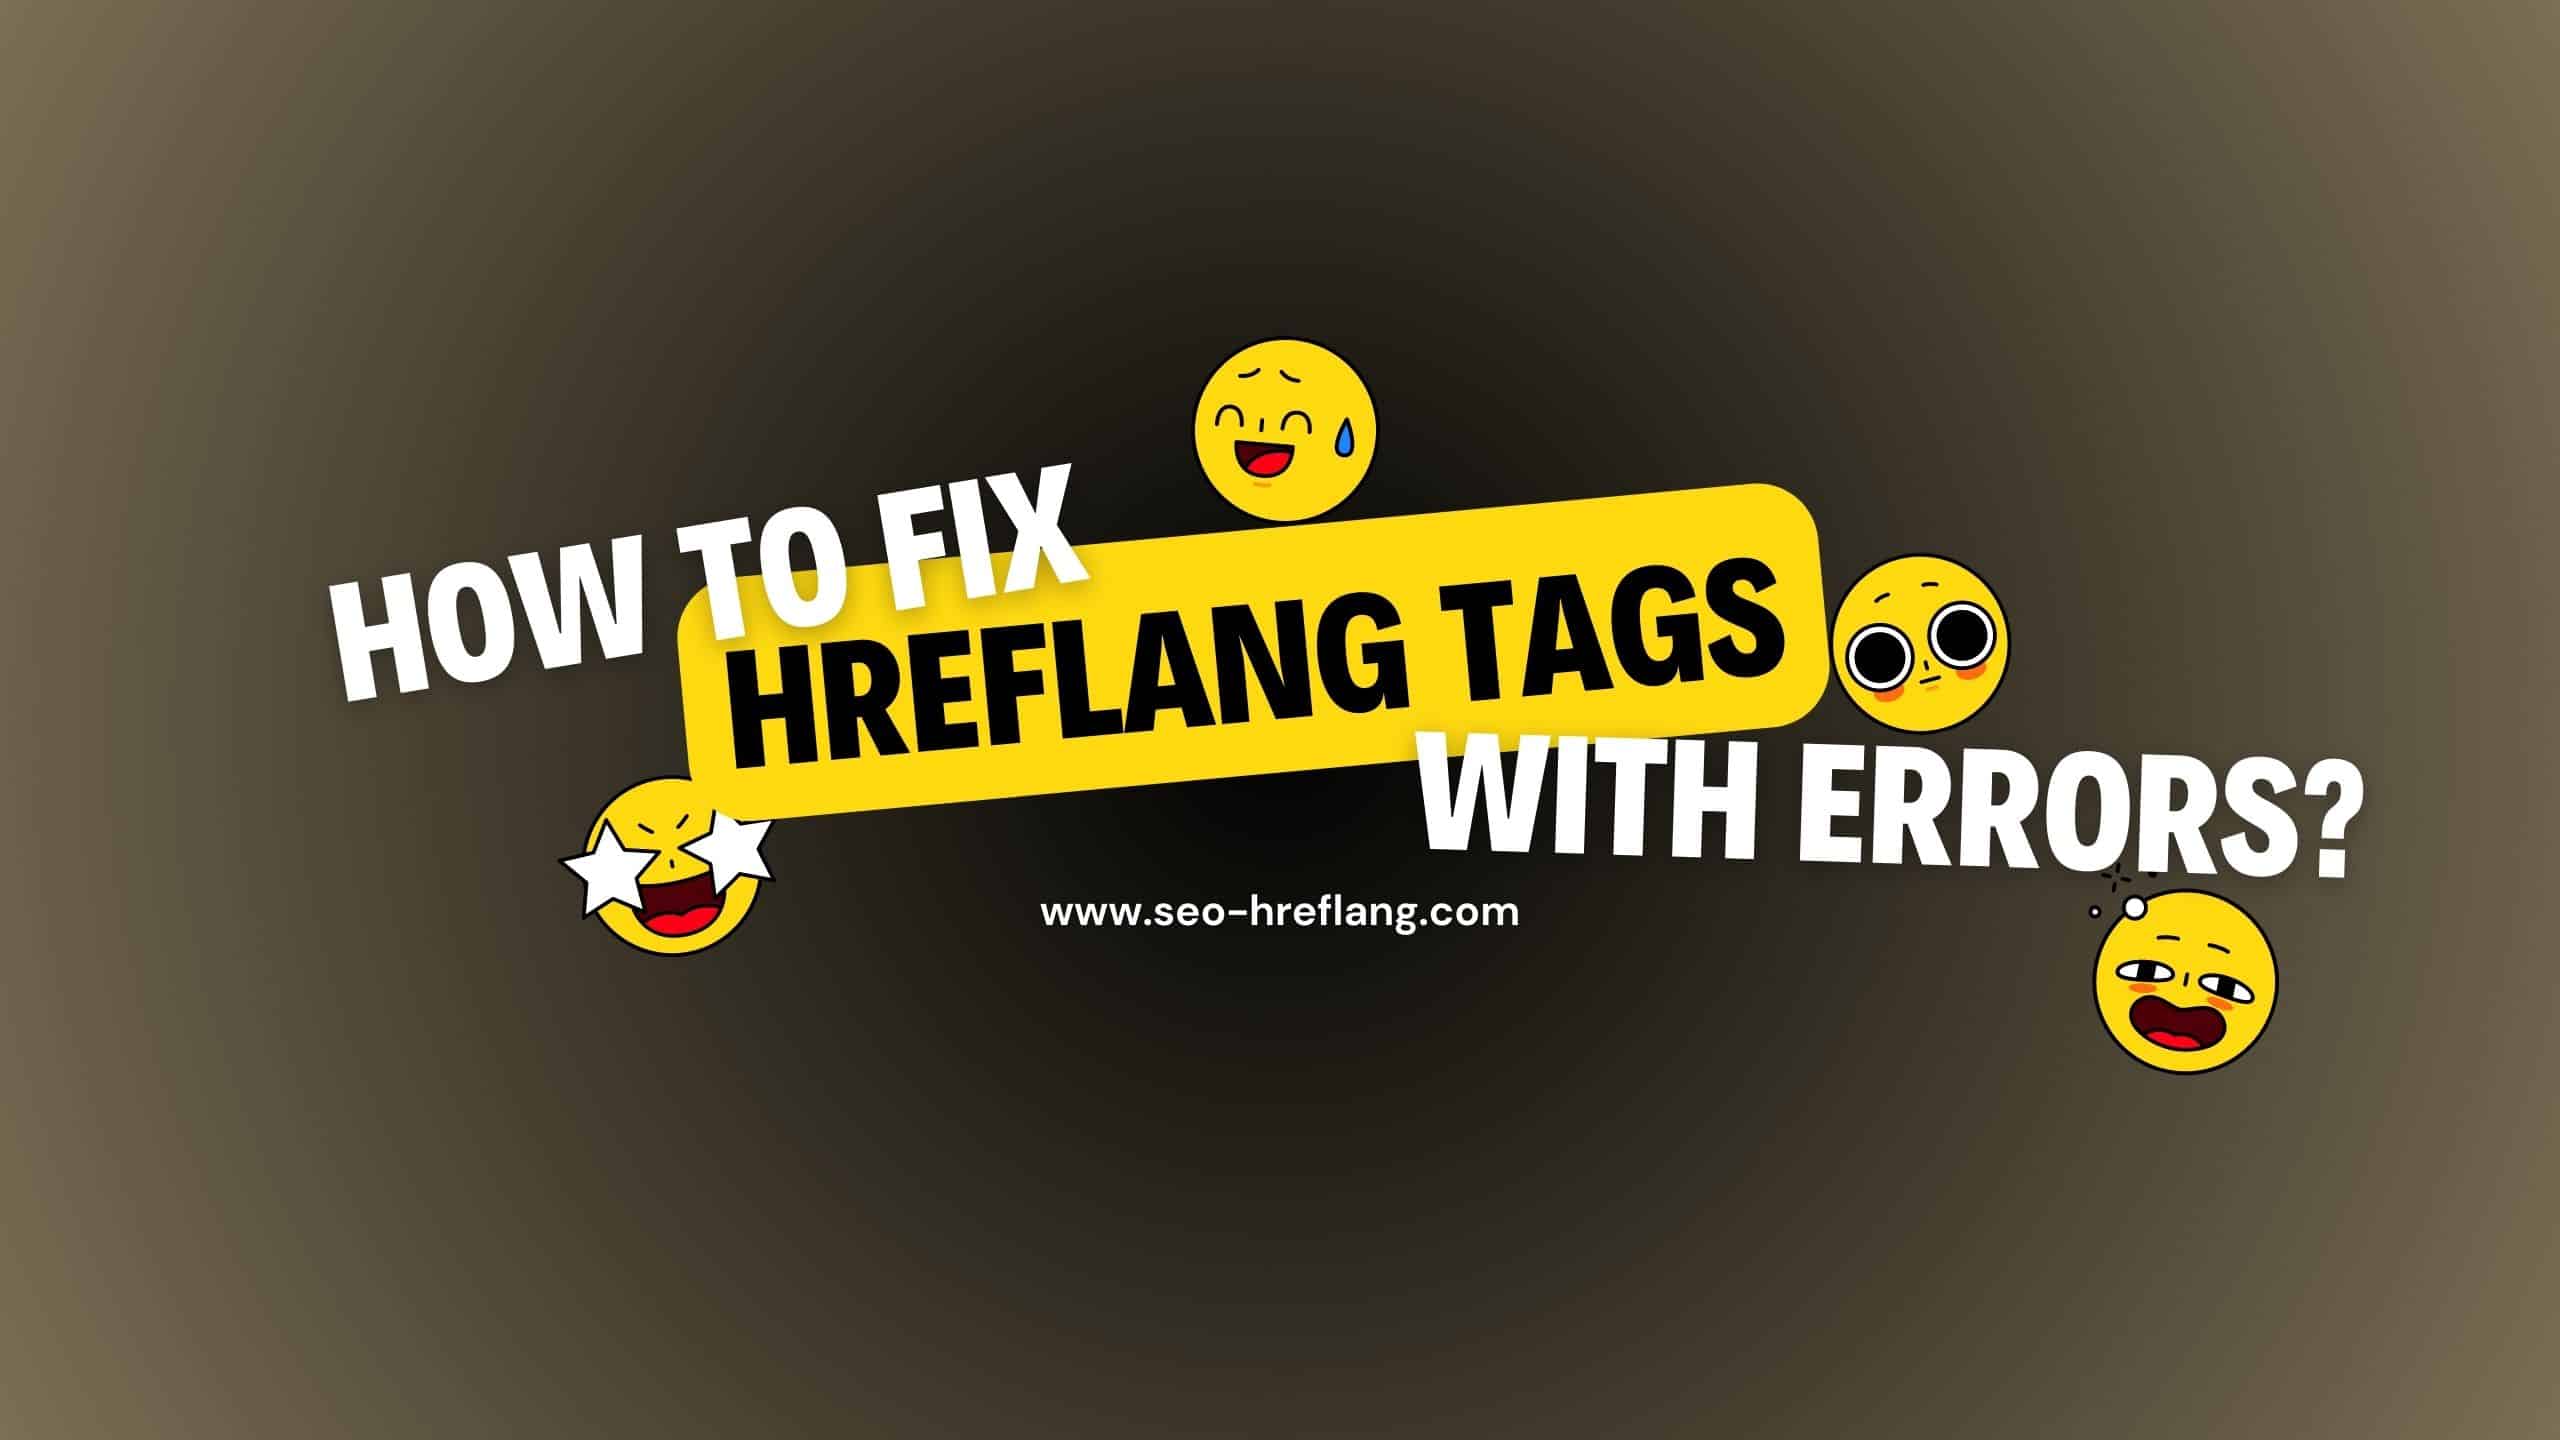 How to Fix Hreflang Tags with Errors